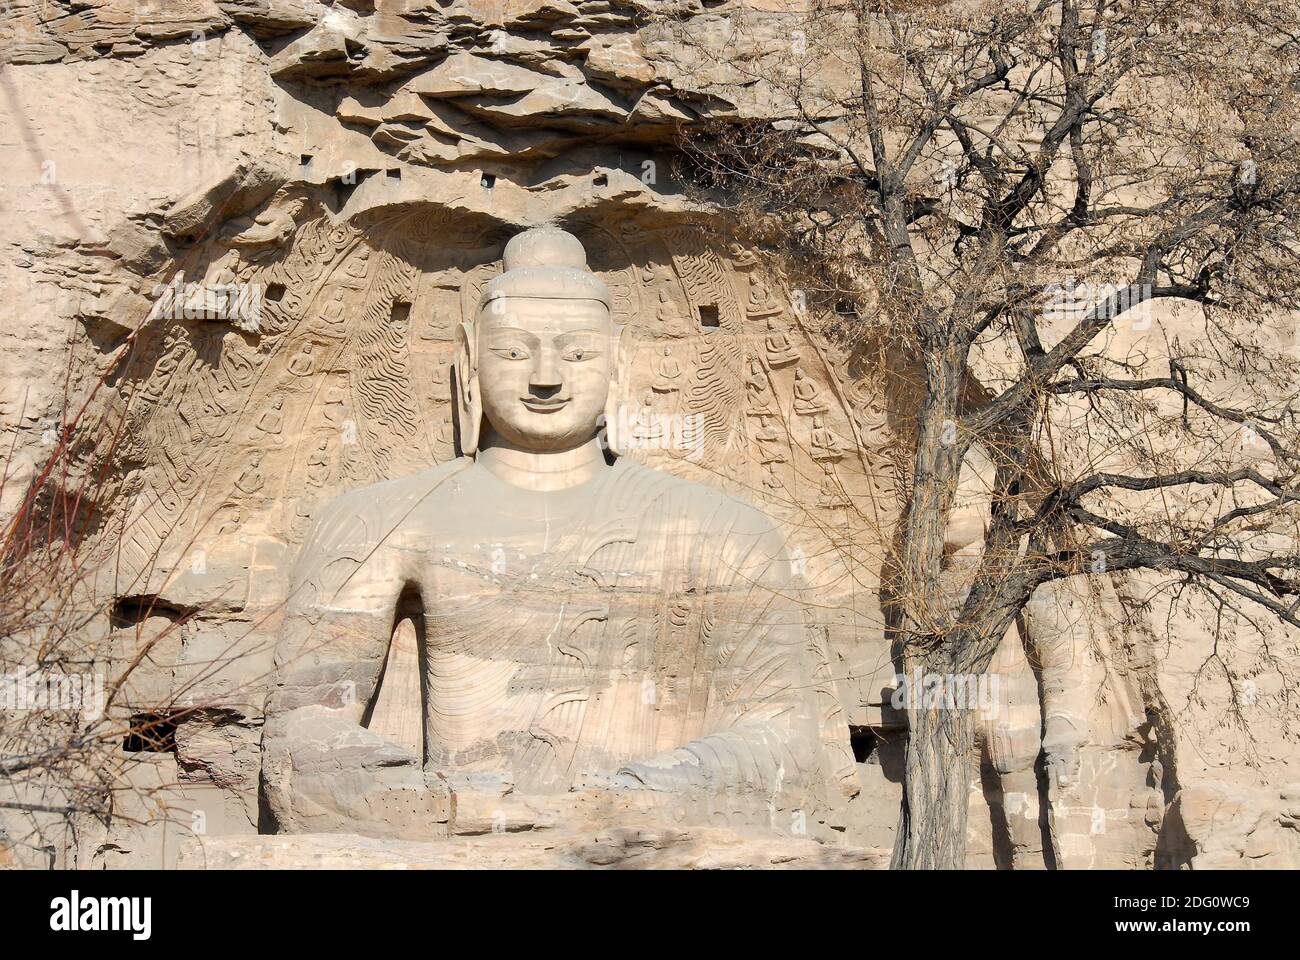 Yungang Grottoes near Datong in Shanxi Province, China. Cave 20, the most famous Buddha statues at Yungang. Front view with tree. Stock Photo